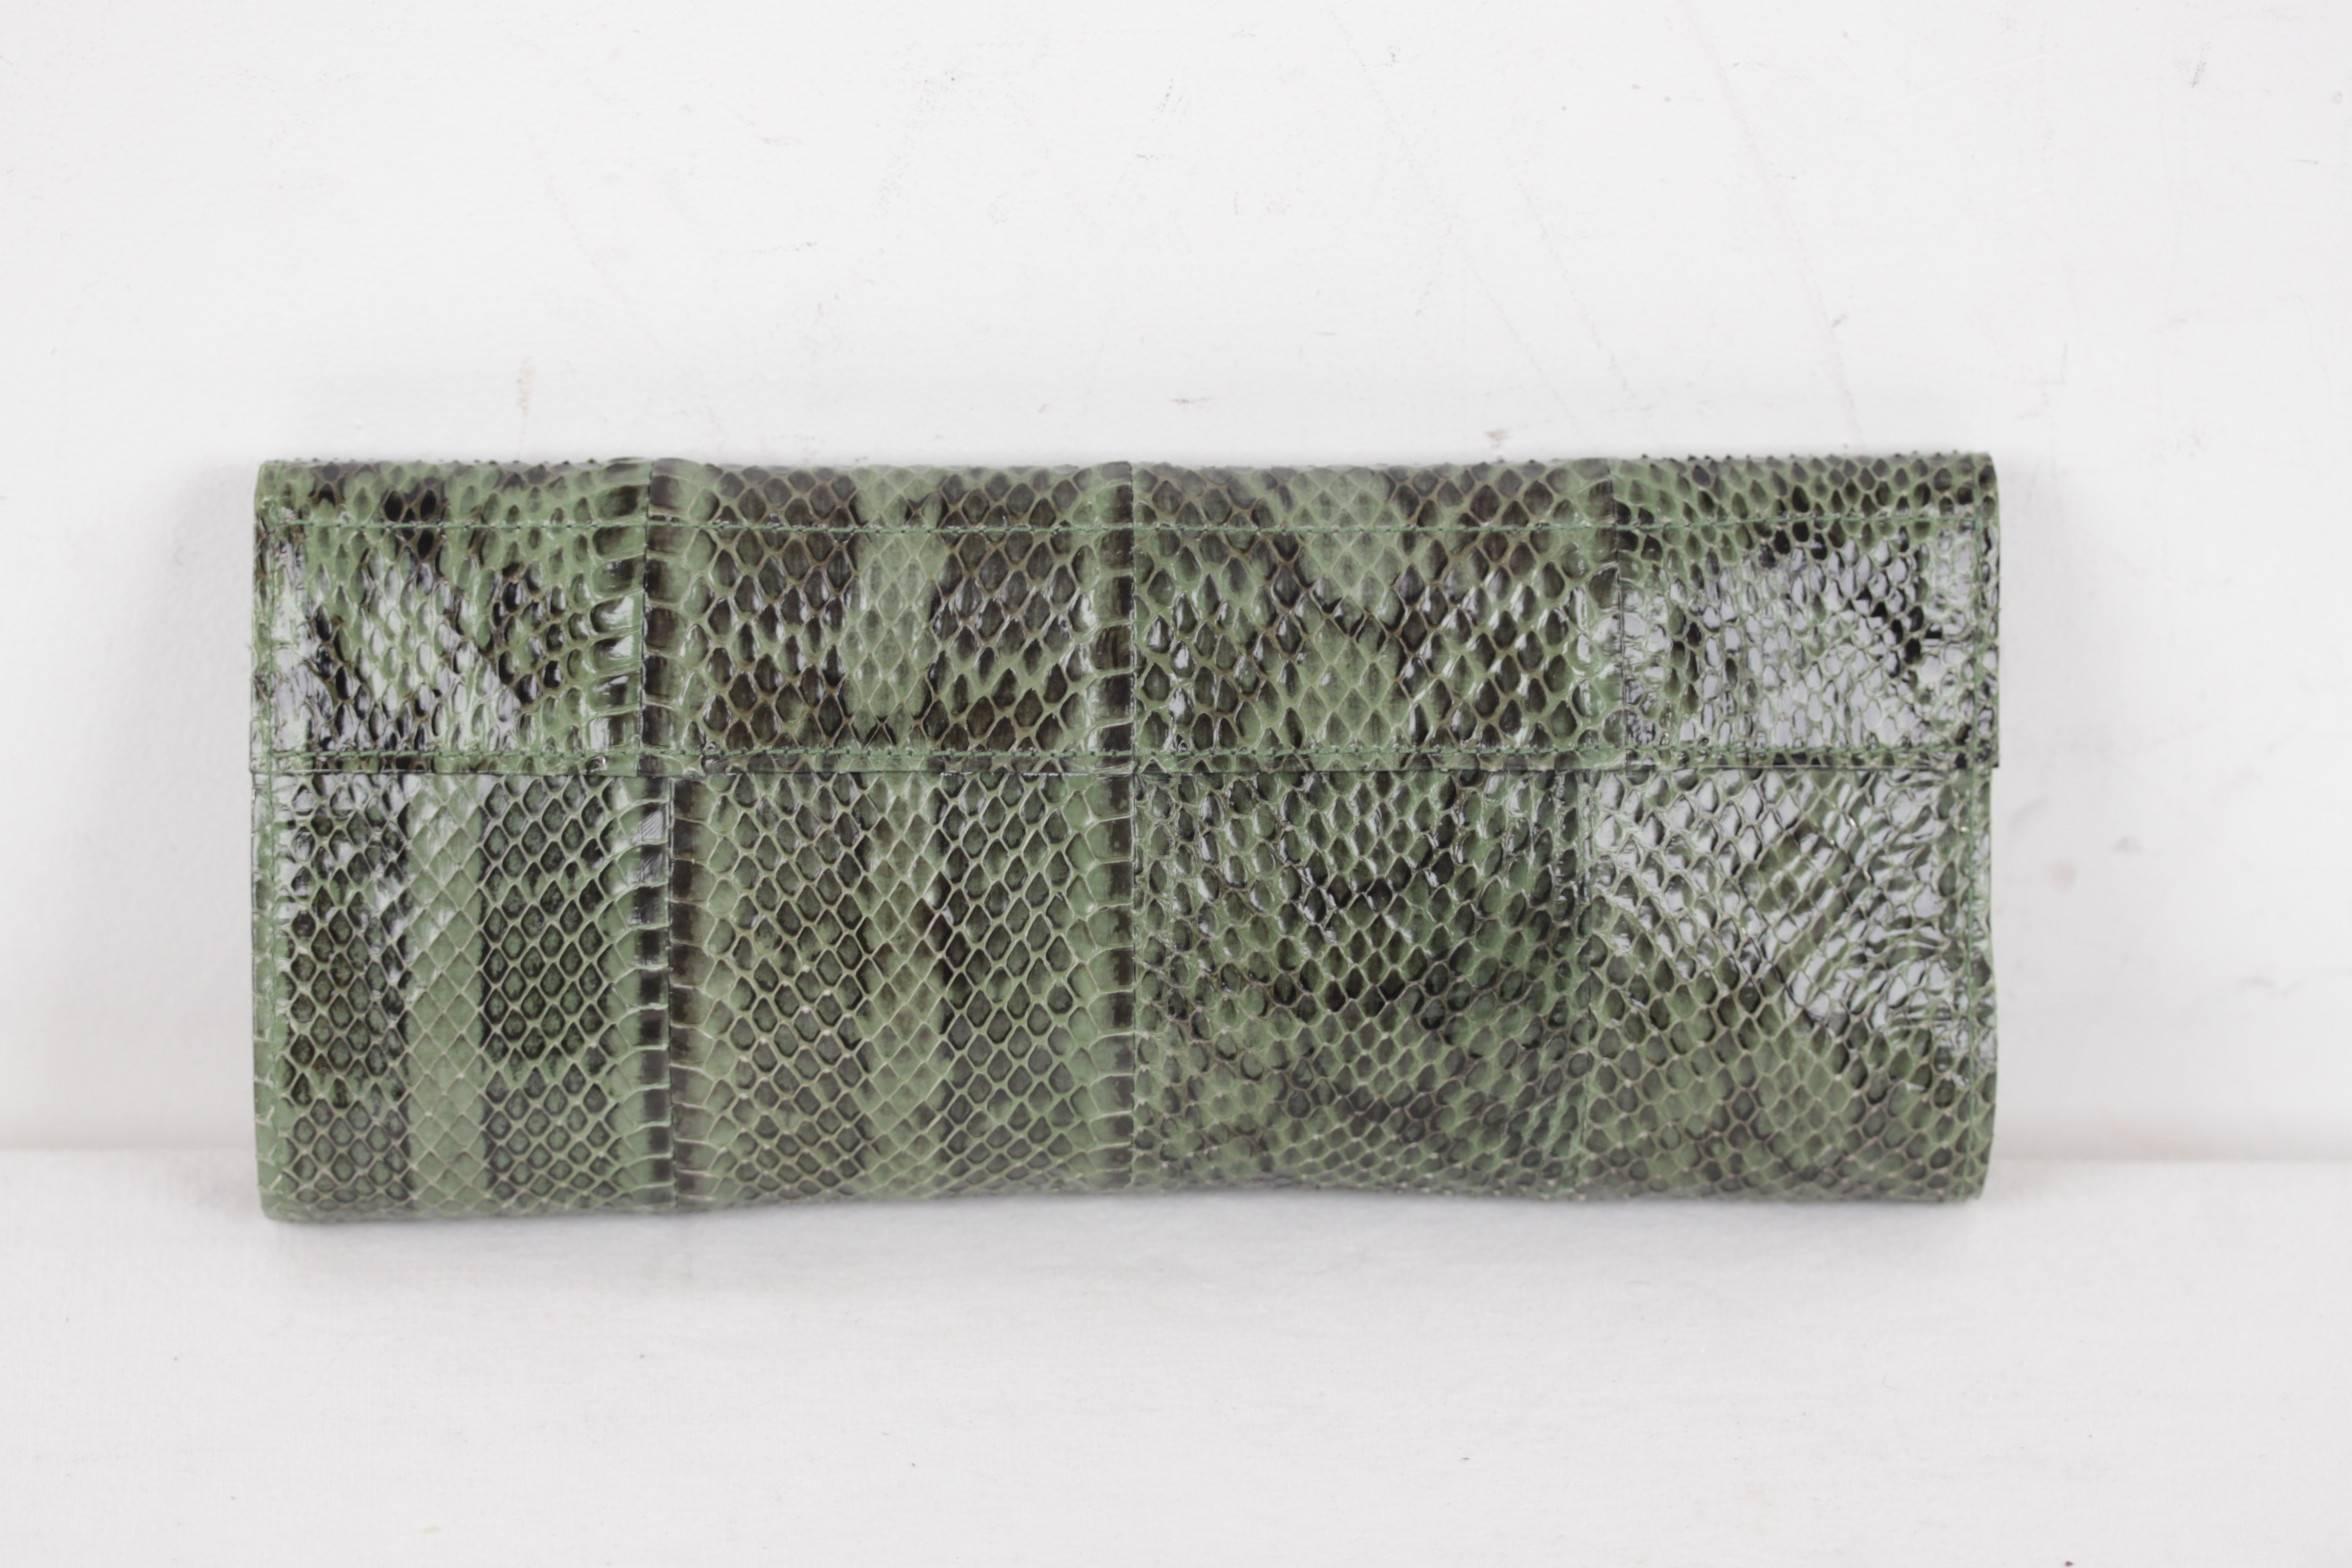 R Y Augousti Green Python Snakeskin Leather Clutch Handbag Purse Pouch Bag In Excellent Condition In Rome, Rome